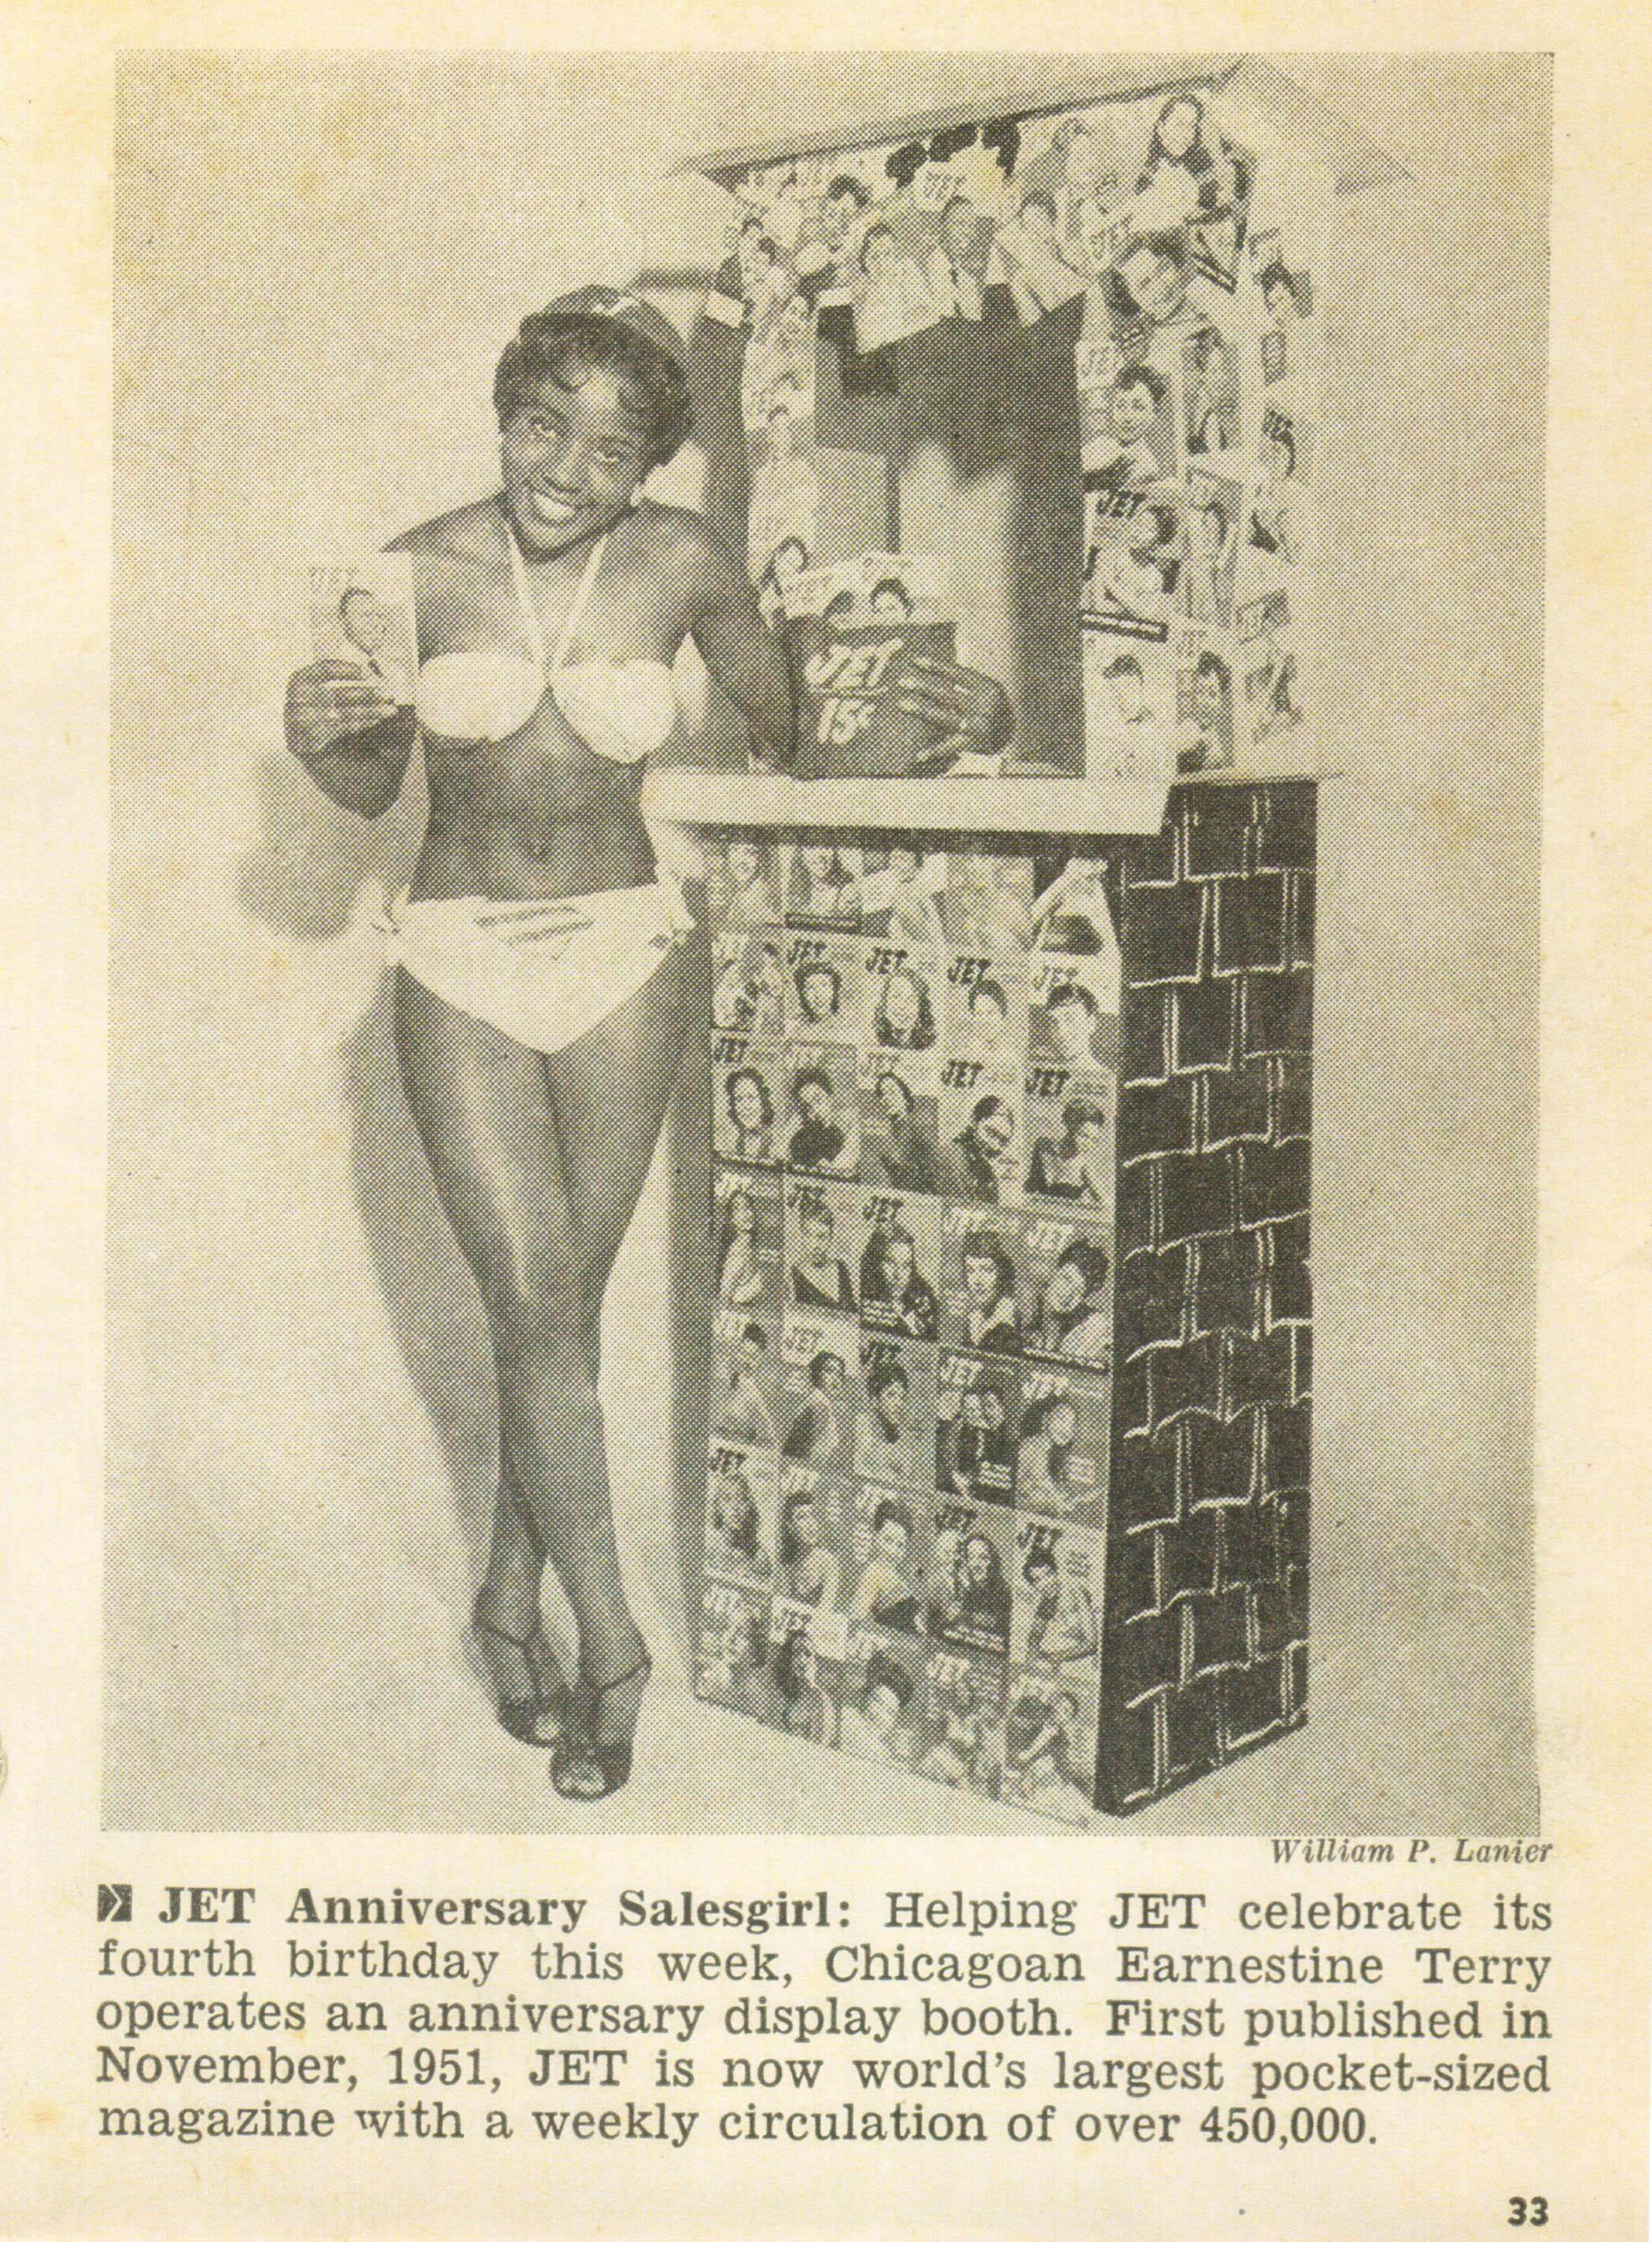 Ernestine Terry poses for Jet magazine in 1955. (Courtesy of Ernestine Terry)